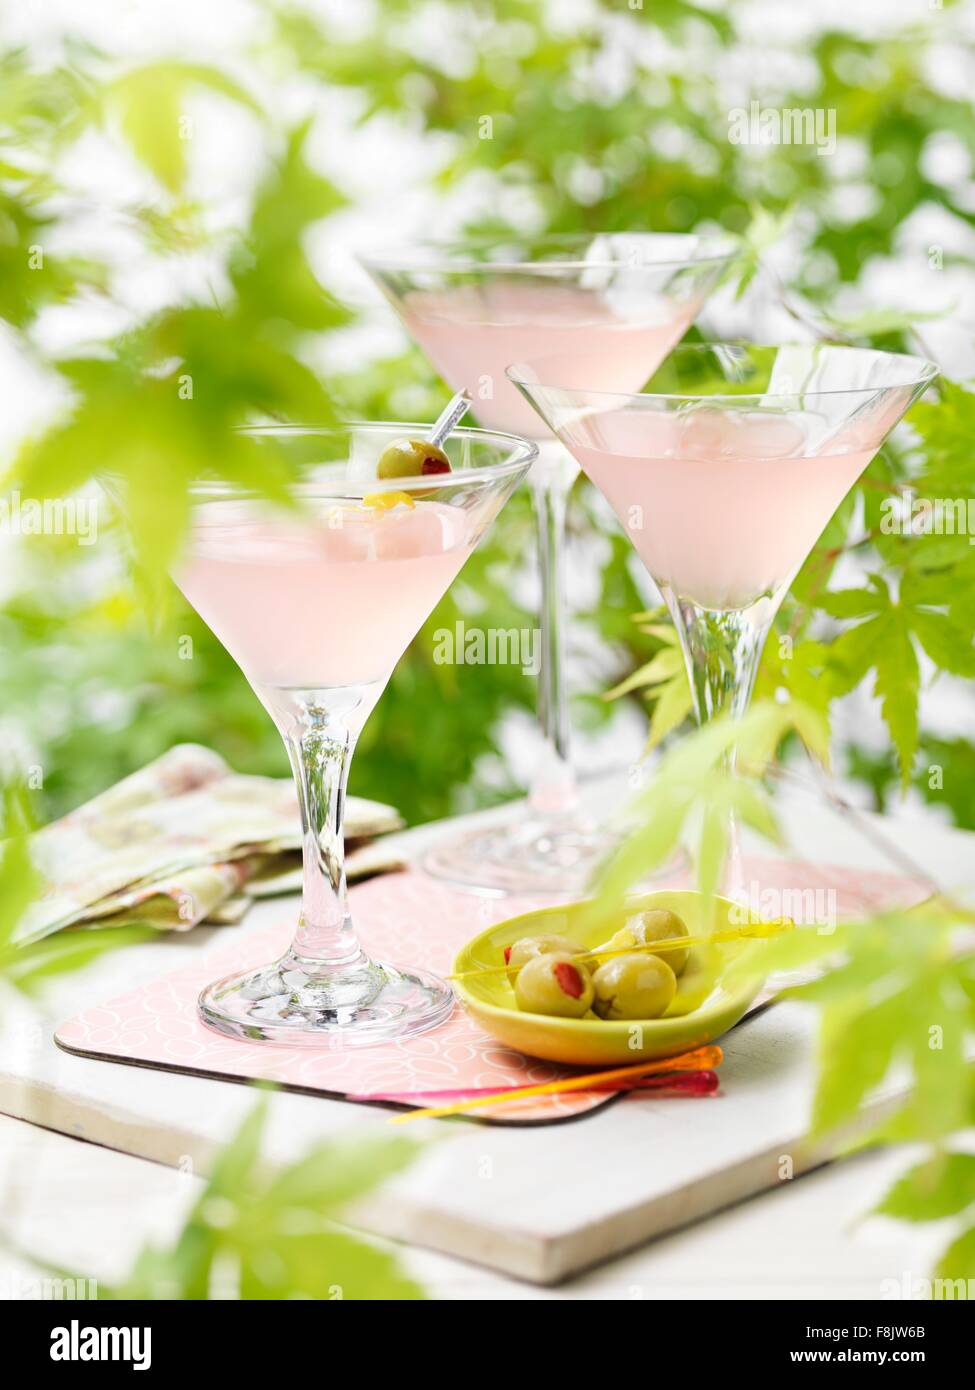 Three glasses of pink grapefruit and martini cocktails with green olives Stock Photo